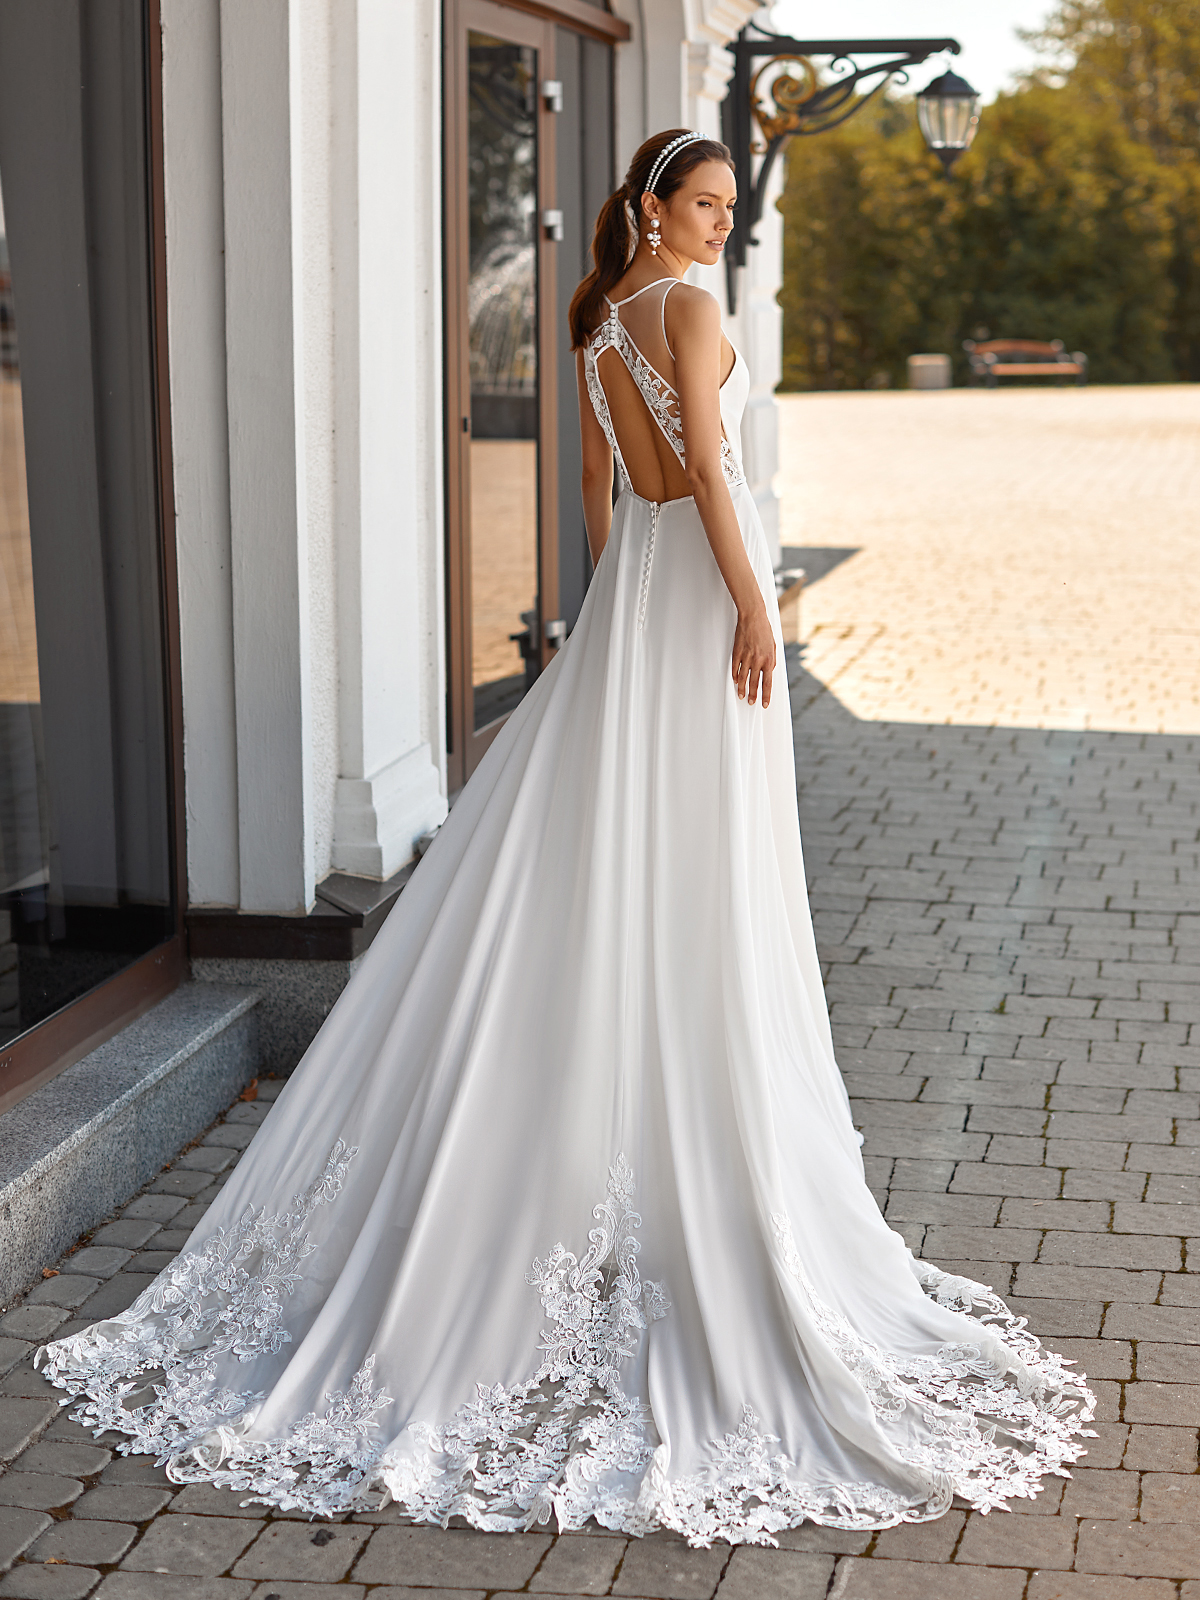 Different Types of Wedding Dresses You Can Wear At Your Wedding